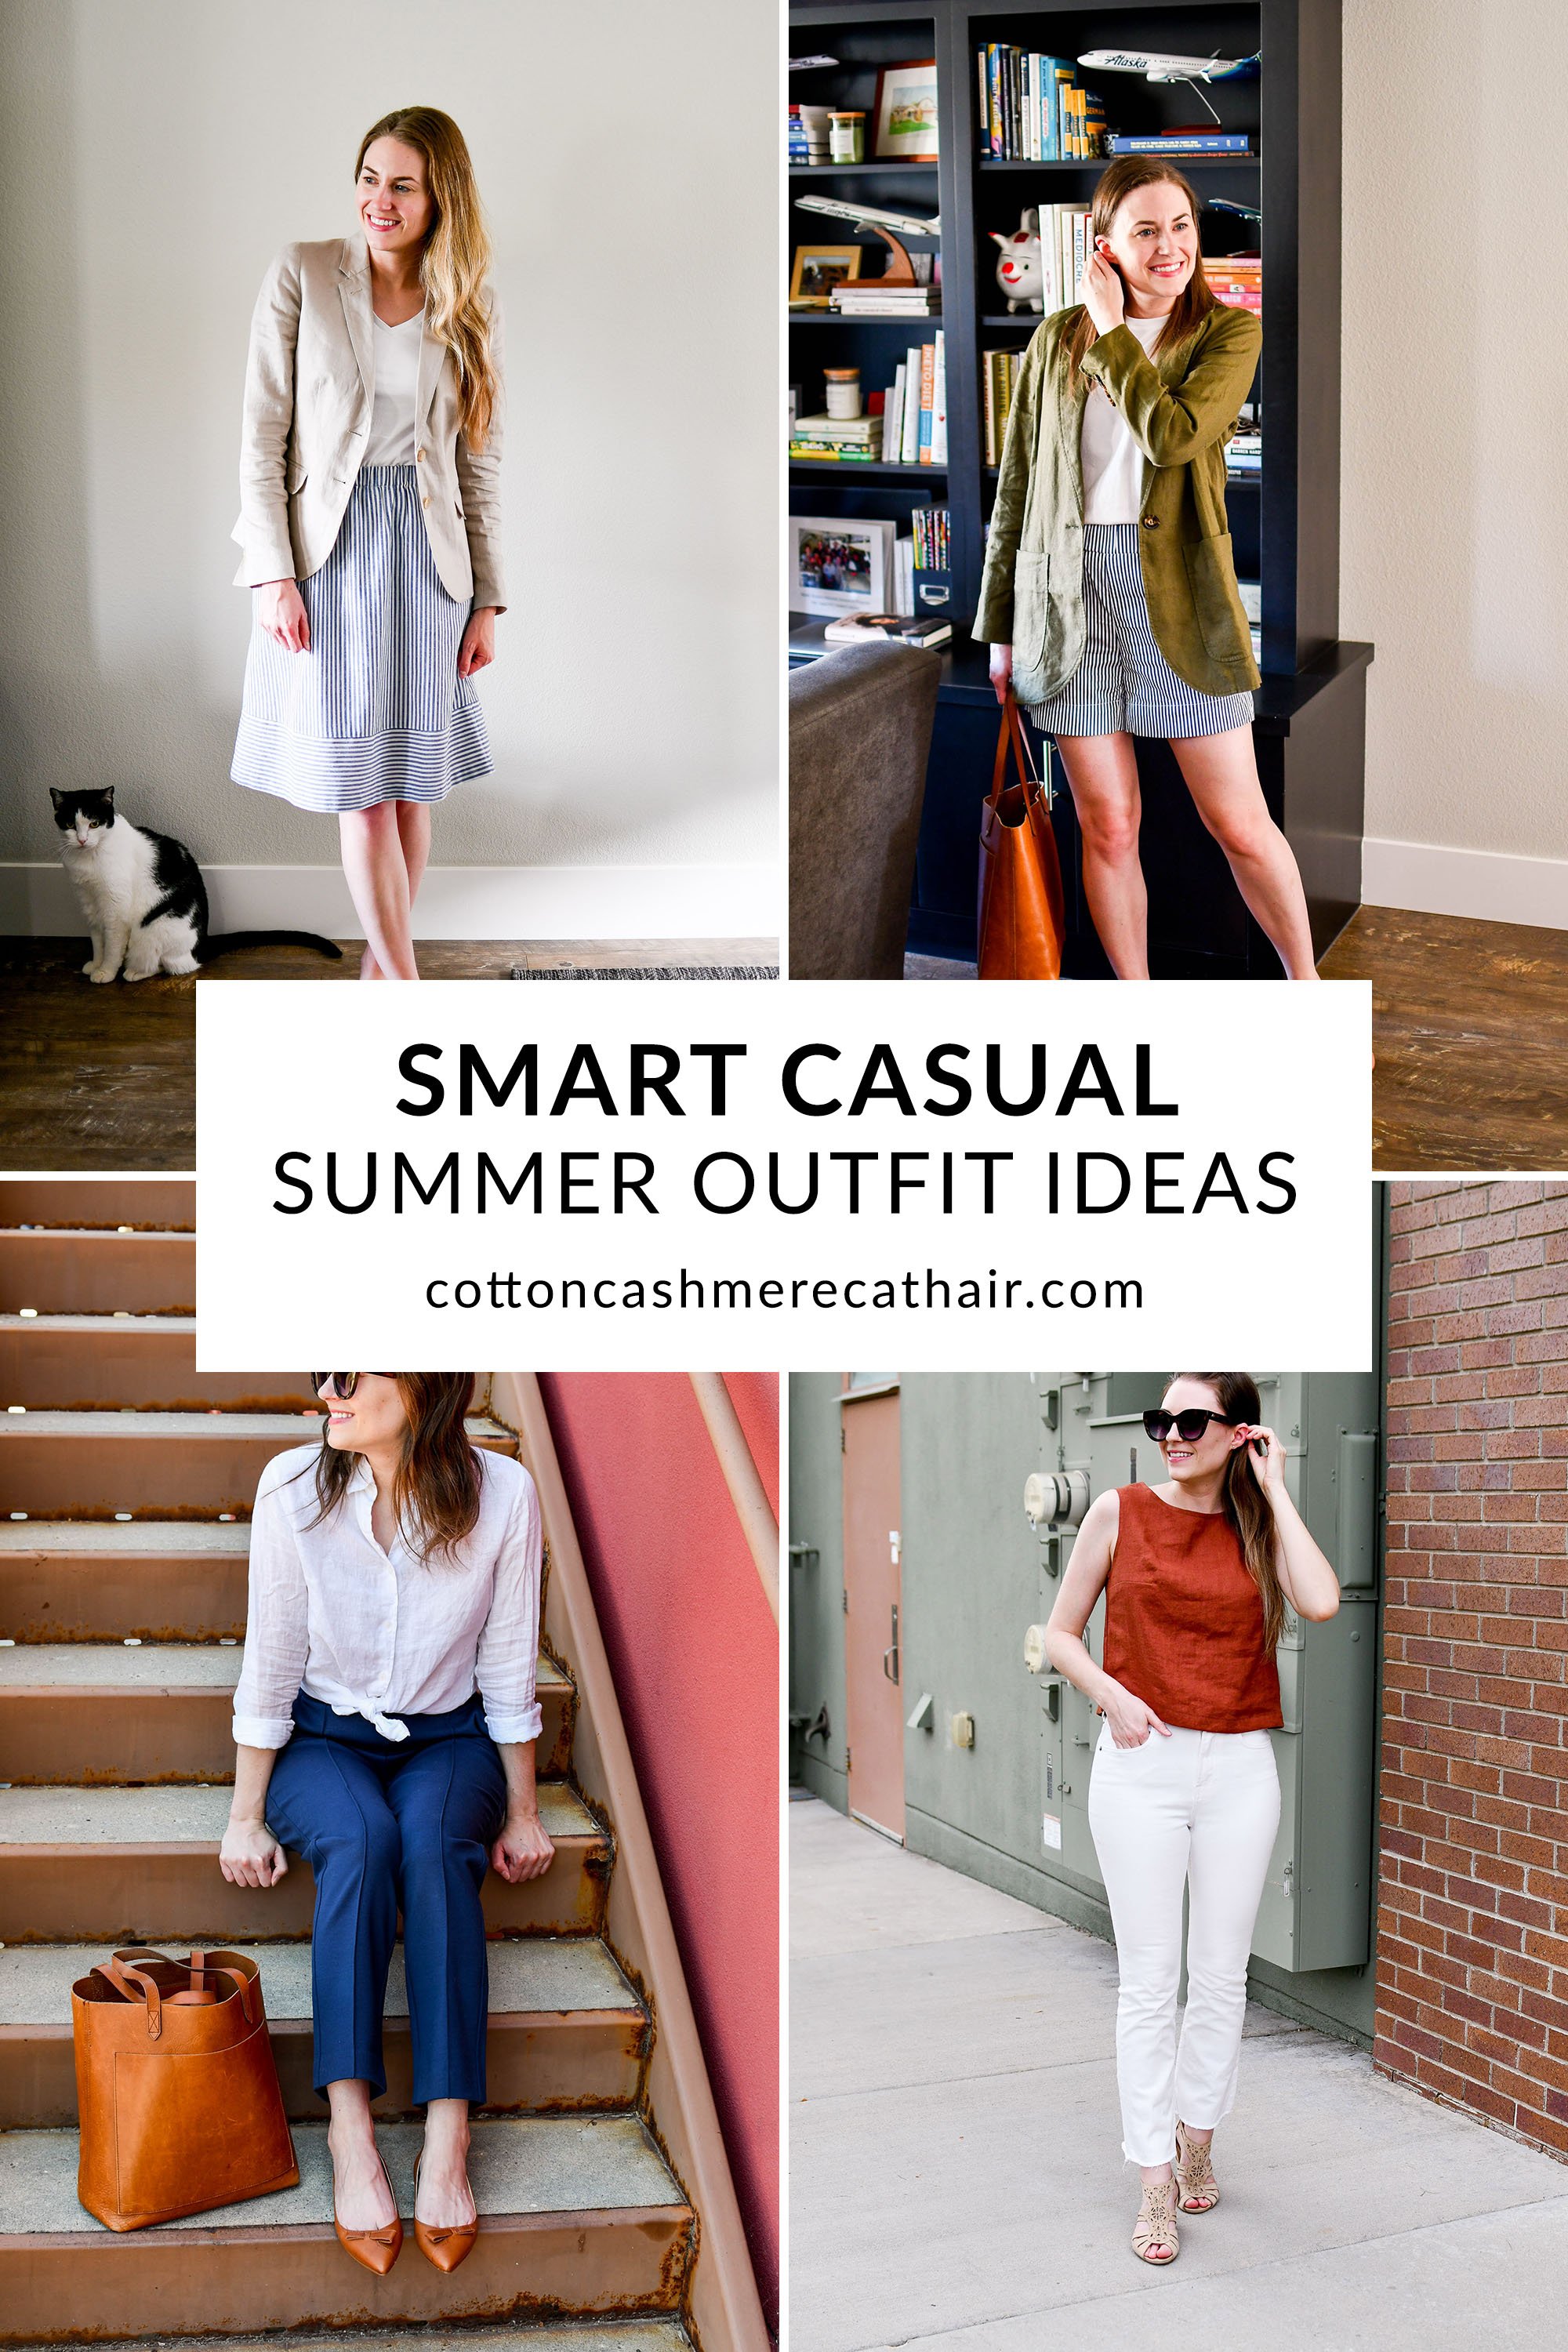 How to Dress Smart Casual in the Summer (+ 16 Outfit Ideas!)